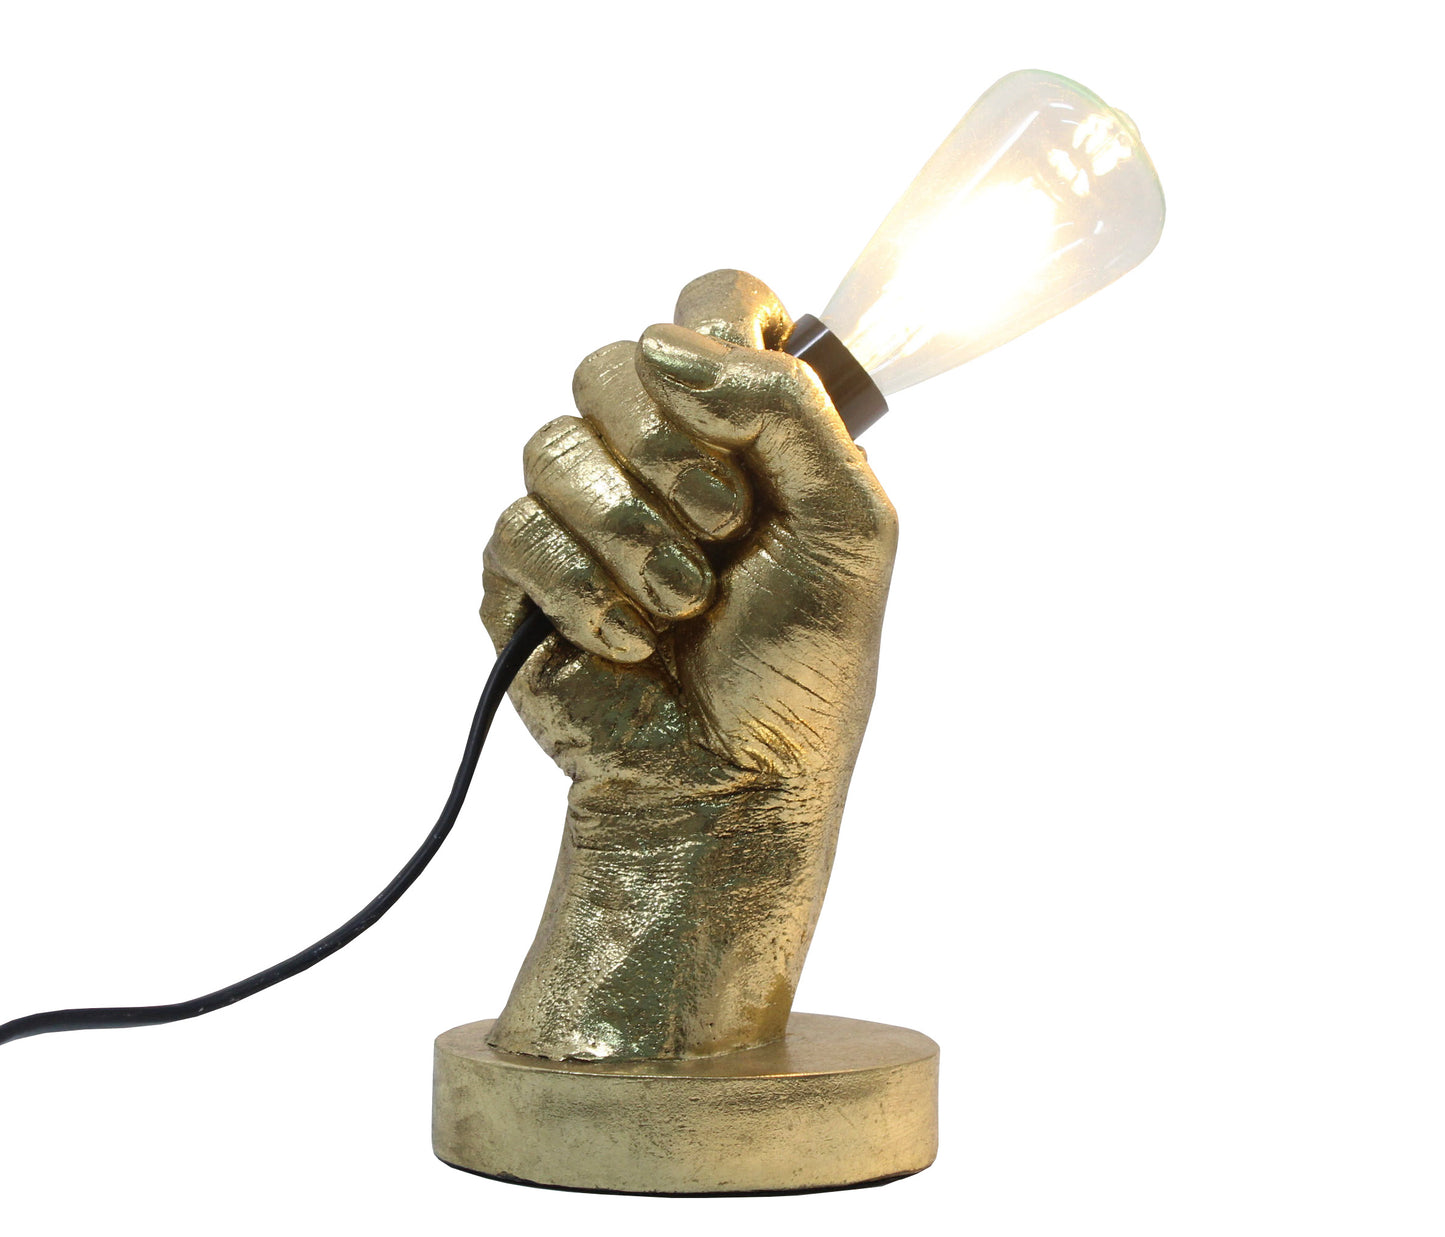 Gold "Hand Held" Table Lamp